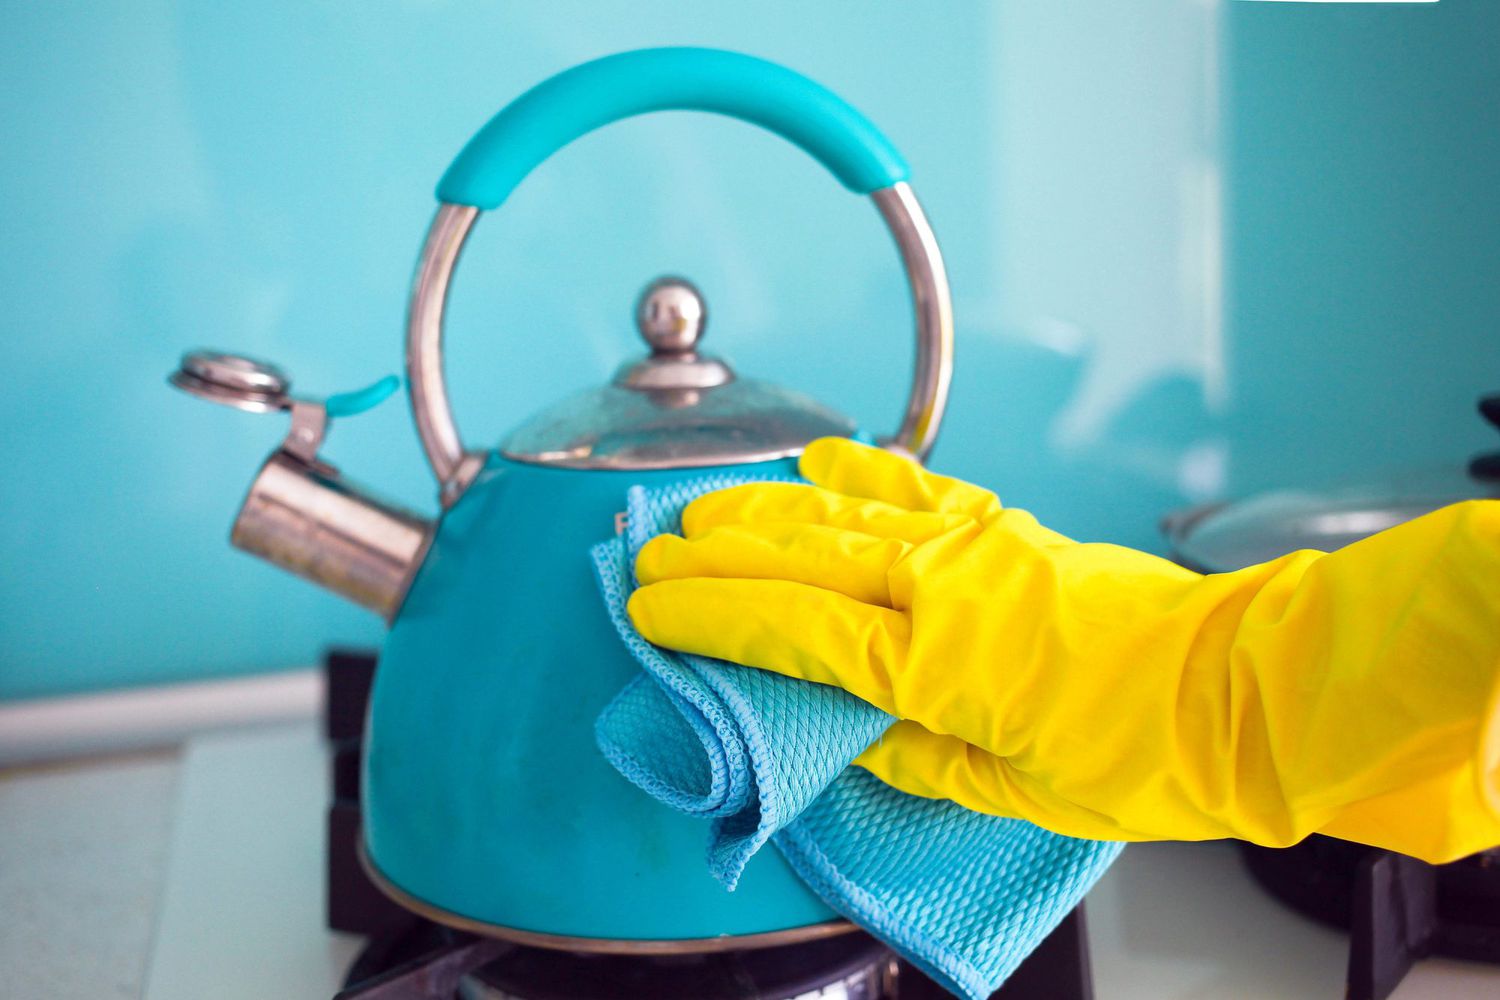 A female hand in a rubber yellow glove wipes a blue teapot with a rag.